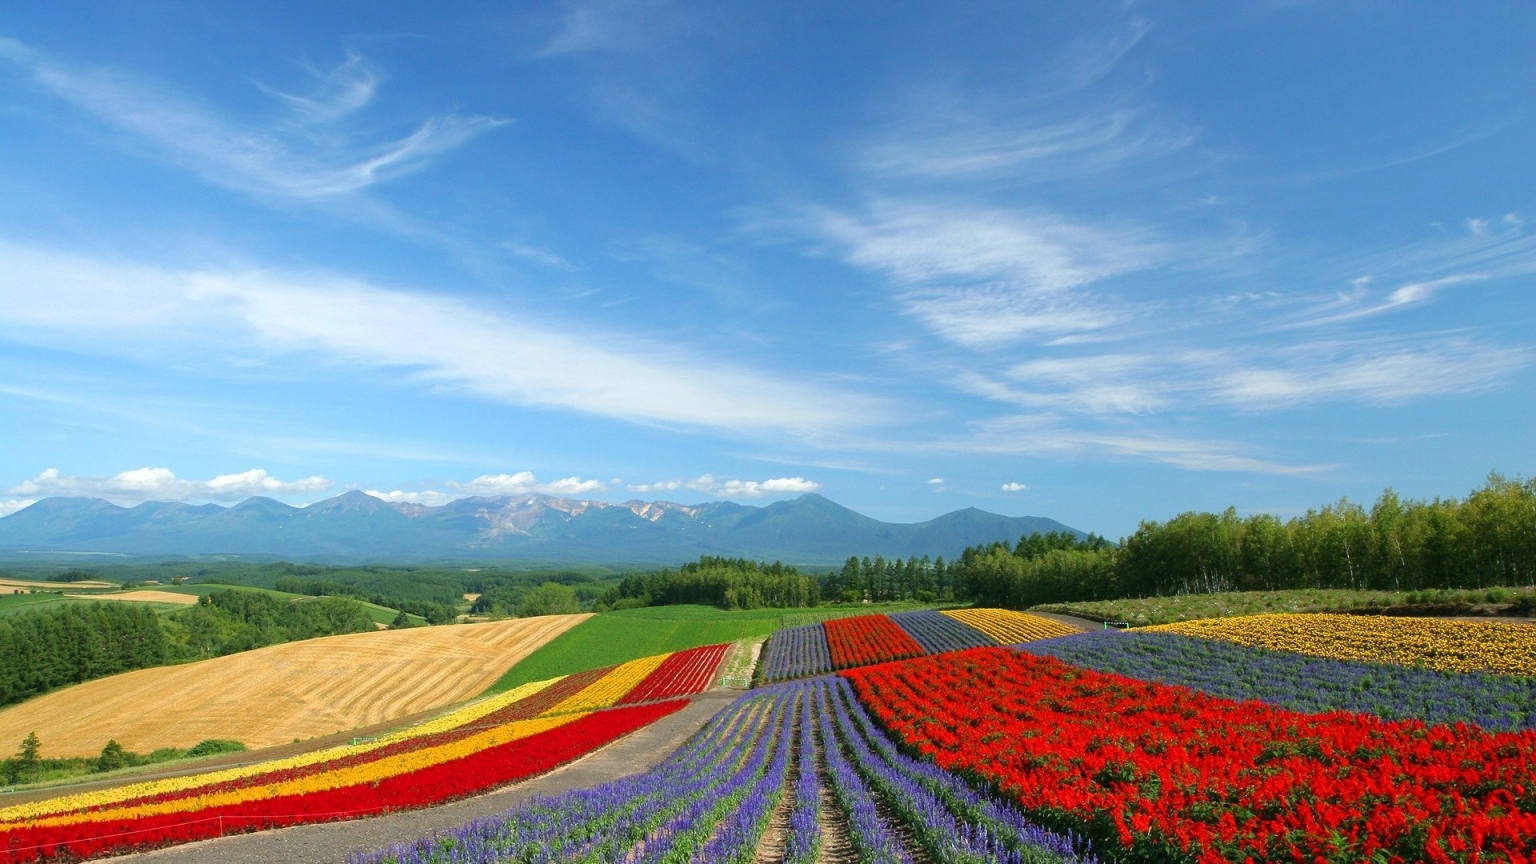 Colourful land for 1536 x 864 HDTV resolution